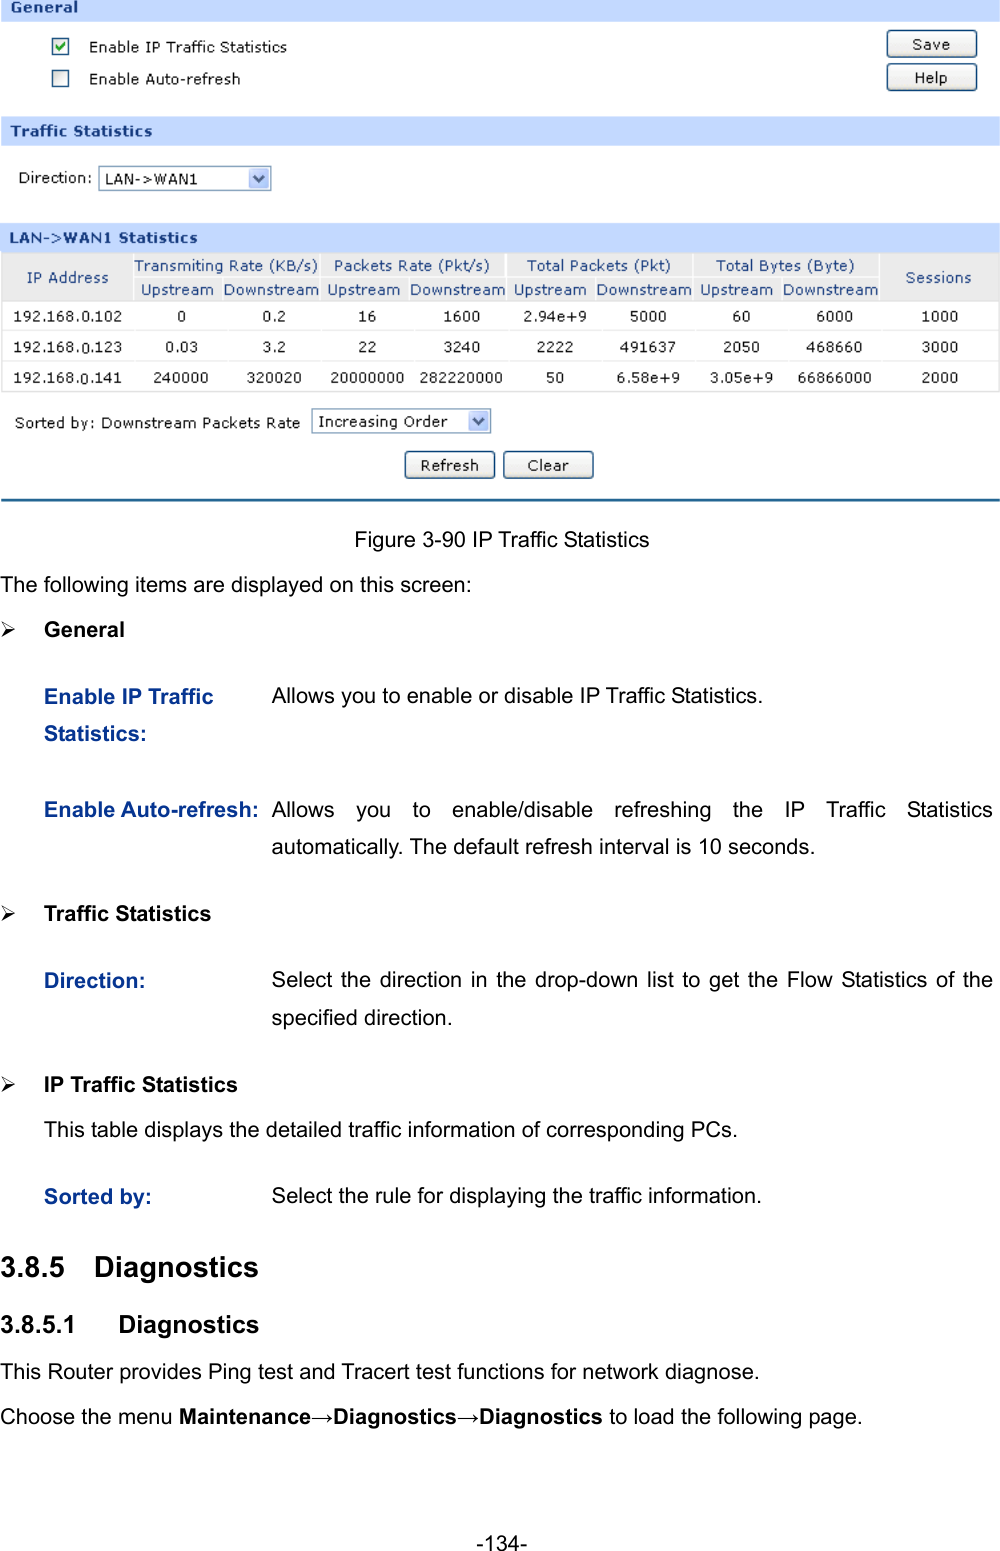  -134-  Figure 3-90 IP Traffic Statistics The following items are displayed on this screen: ¾ General Enable IP Traffic Statistics: Allows you to enable or disable IP Traffic Statistics. Enable Auto-refresh:Allows you to enable/disable refreshing the IP Traffic Statisticsautomatically. The default refresh interval is 10 seconds. ¾ Traffic Statistics Direction:  Select the direction in the drop-down list to get the Flow Statistics of the specified direction. ¾ IP Traffic Statistics   This table displays the detailed traffic information of corresponding PCs. Sorted by:  Select the rule for displaying the traffic information. 3.8.5  Diagnostics  3.8.5.1  Diagnostics This Router provides Ping test and Tracert test functions for network diagnose. Choose the menu Maintenance→Diagnostics→Diagnostics to load the following page. 